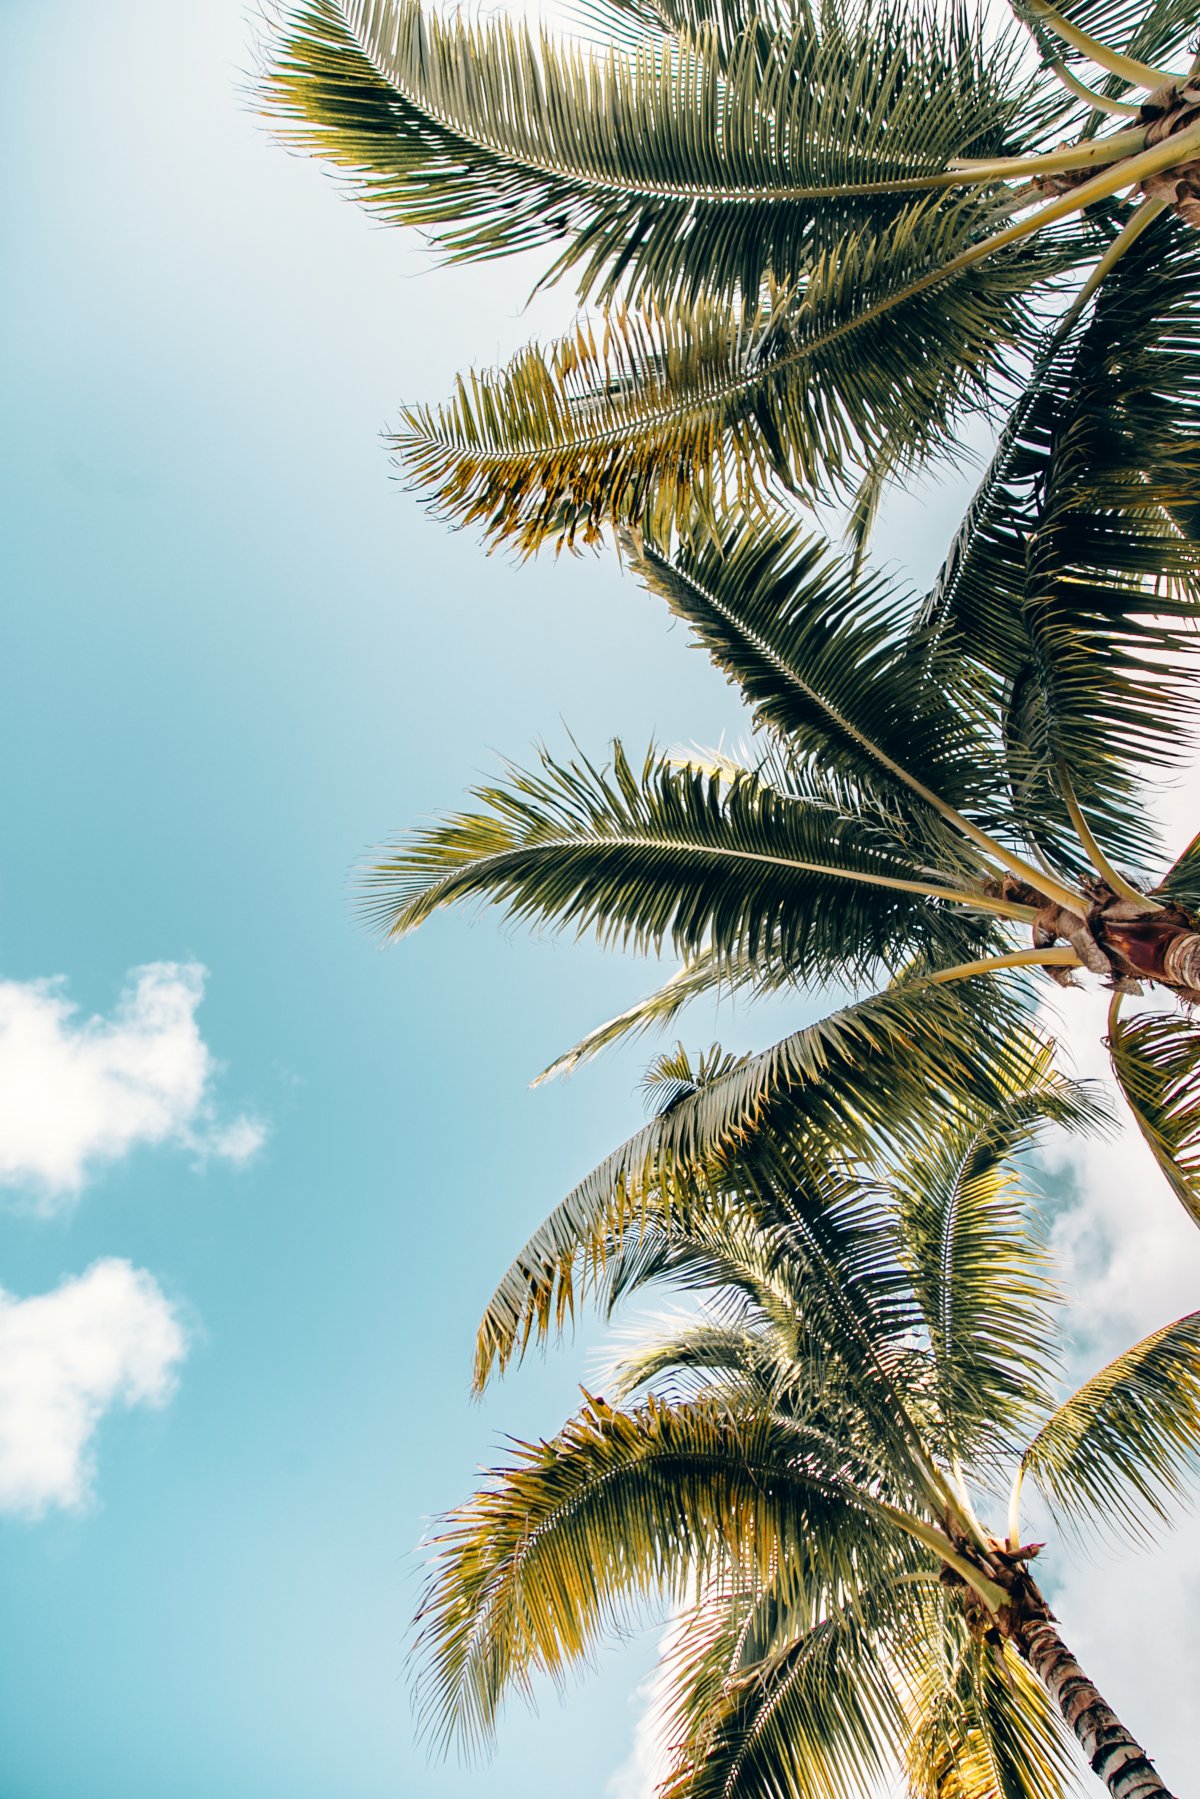 Beautiful pictures of coconut trees with blue sky and white clouds